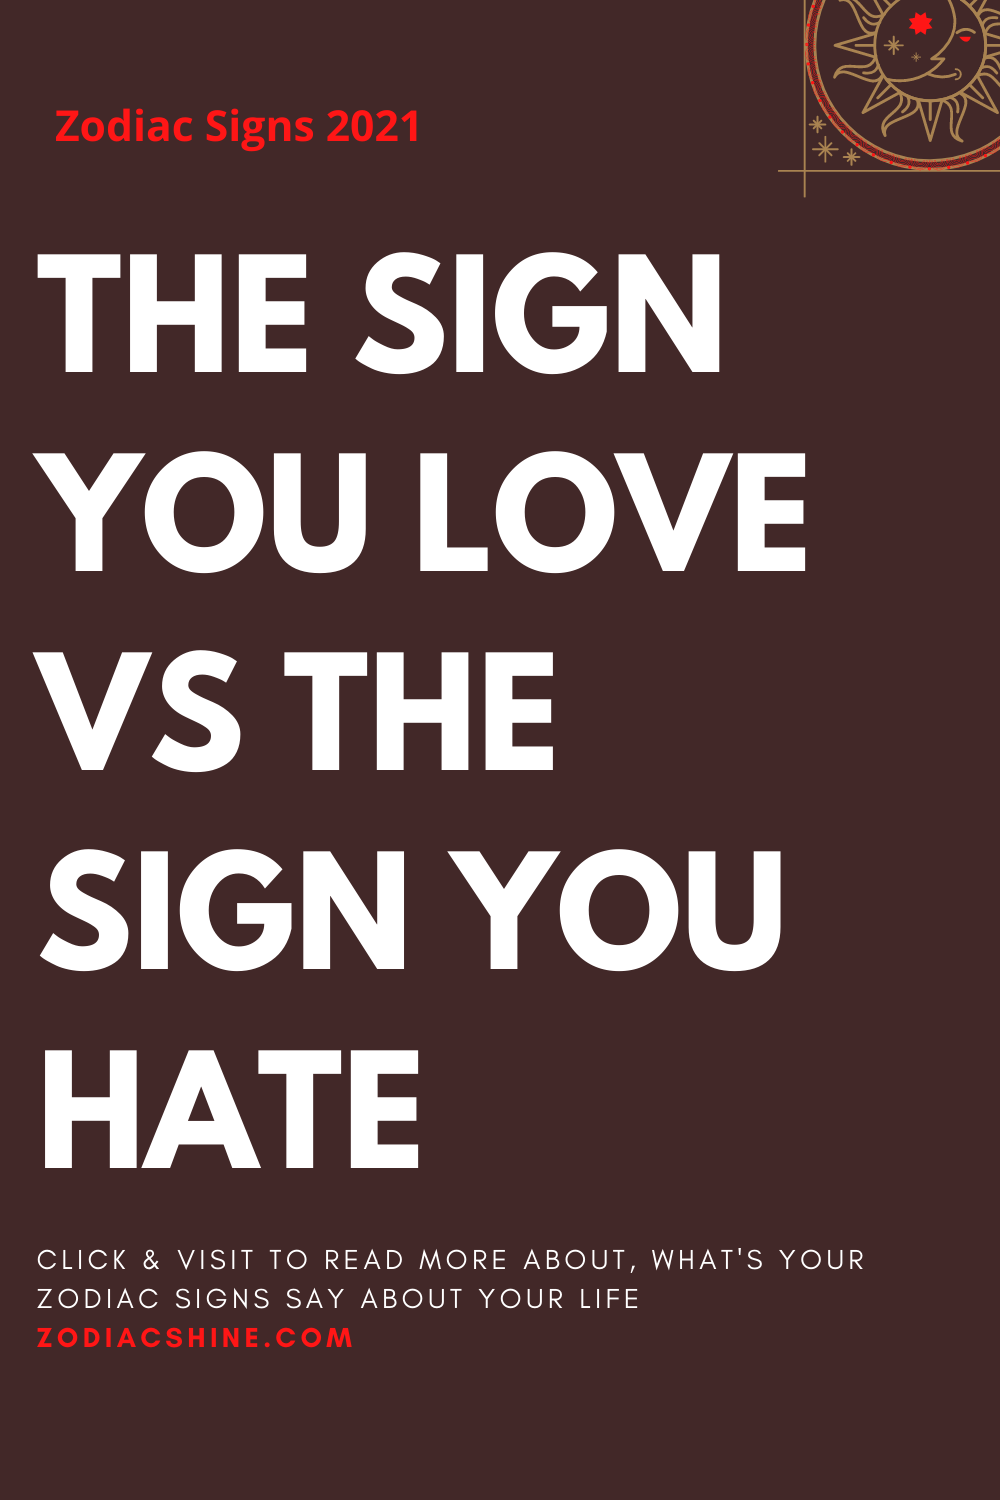 THE SIGN YOU LOVE VS THE SIGN YOU HATE